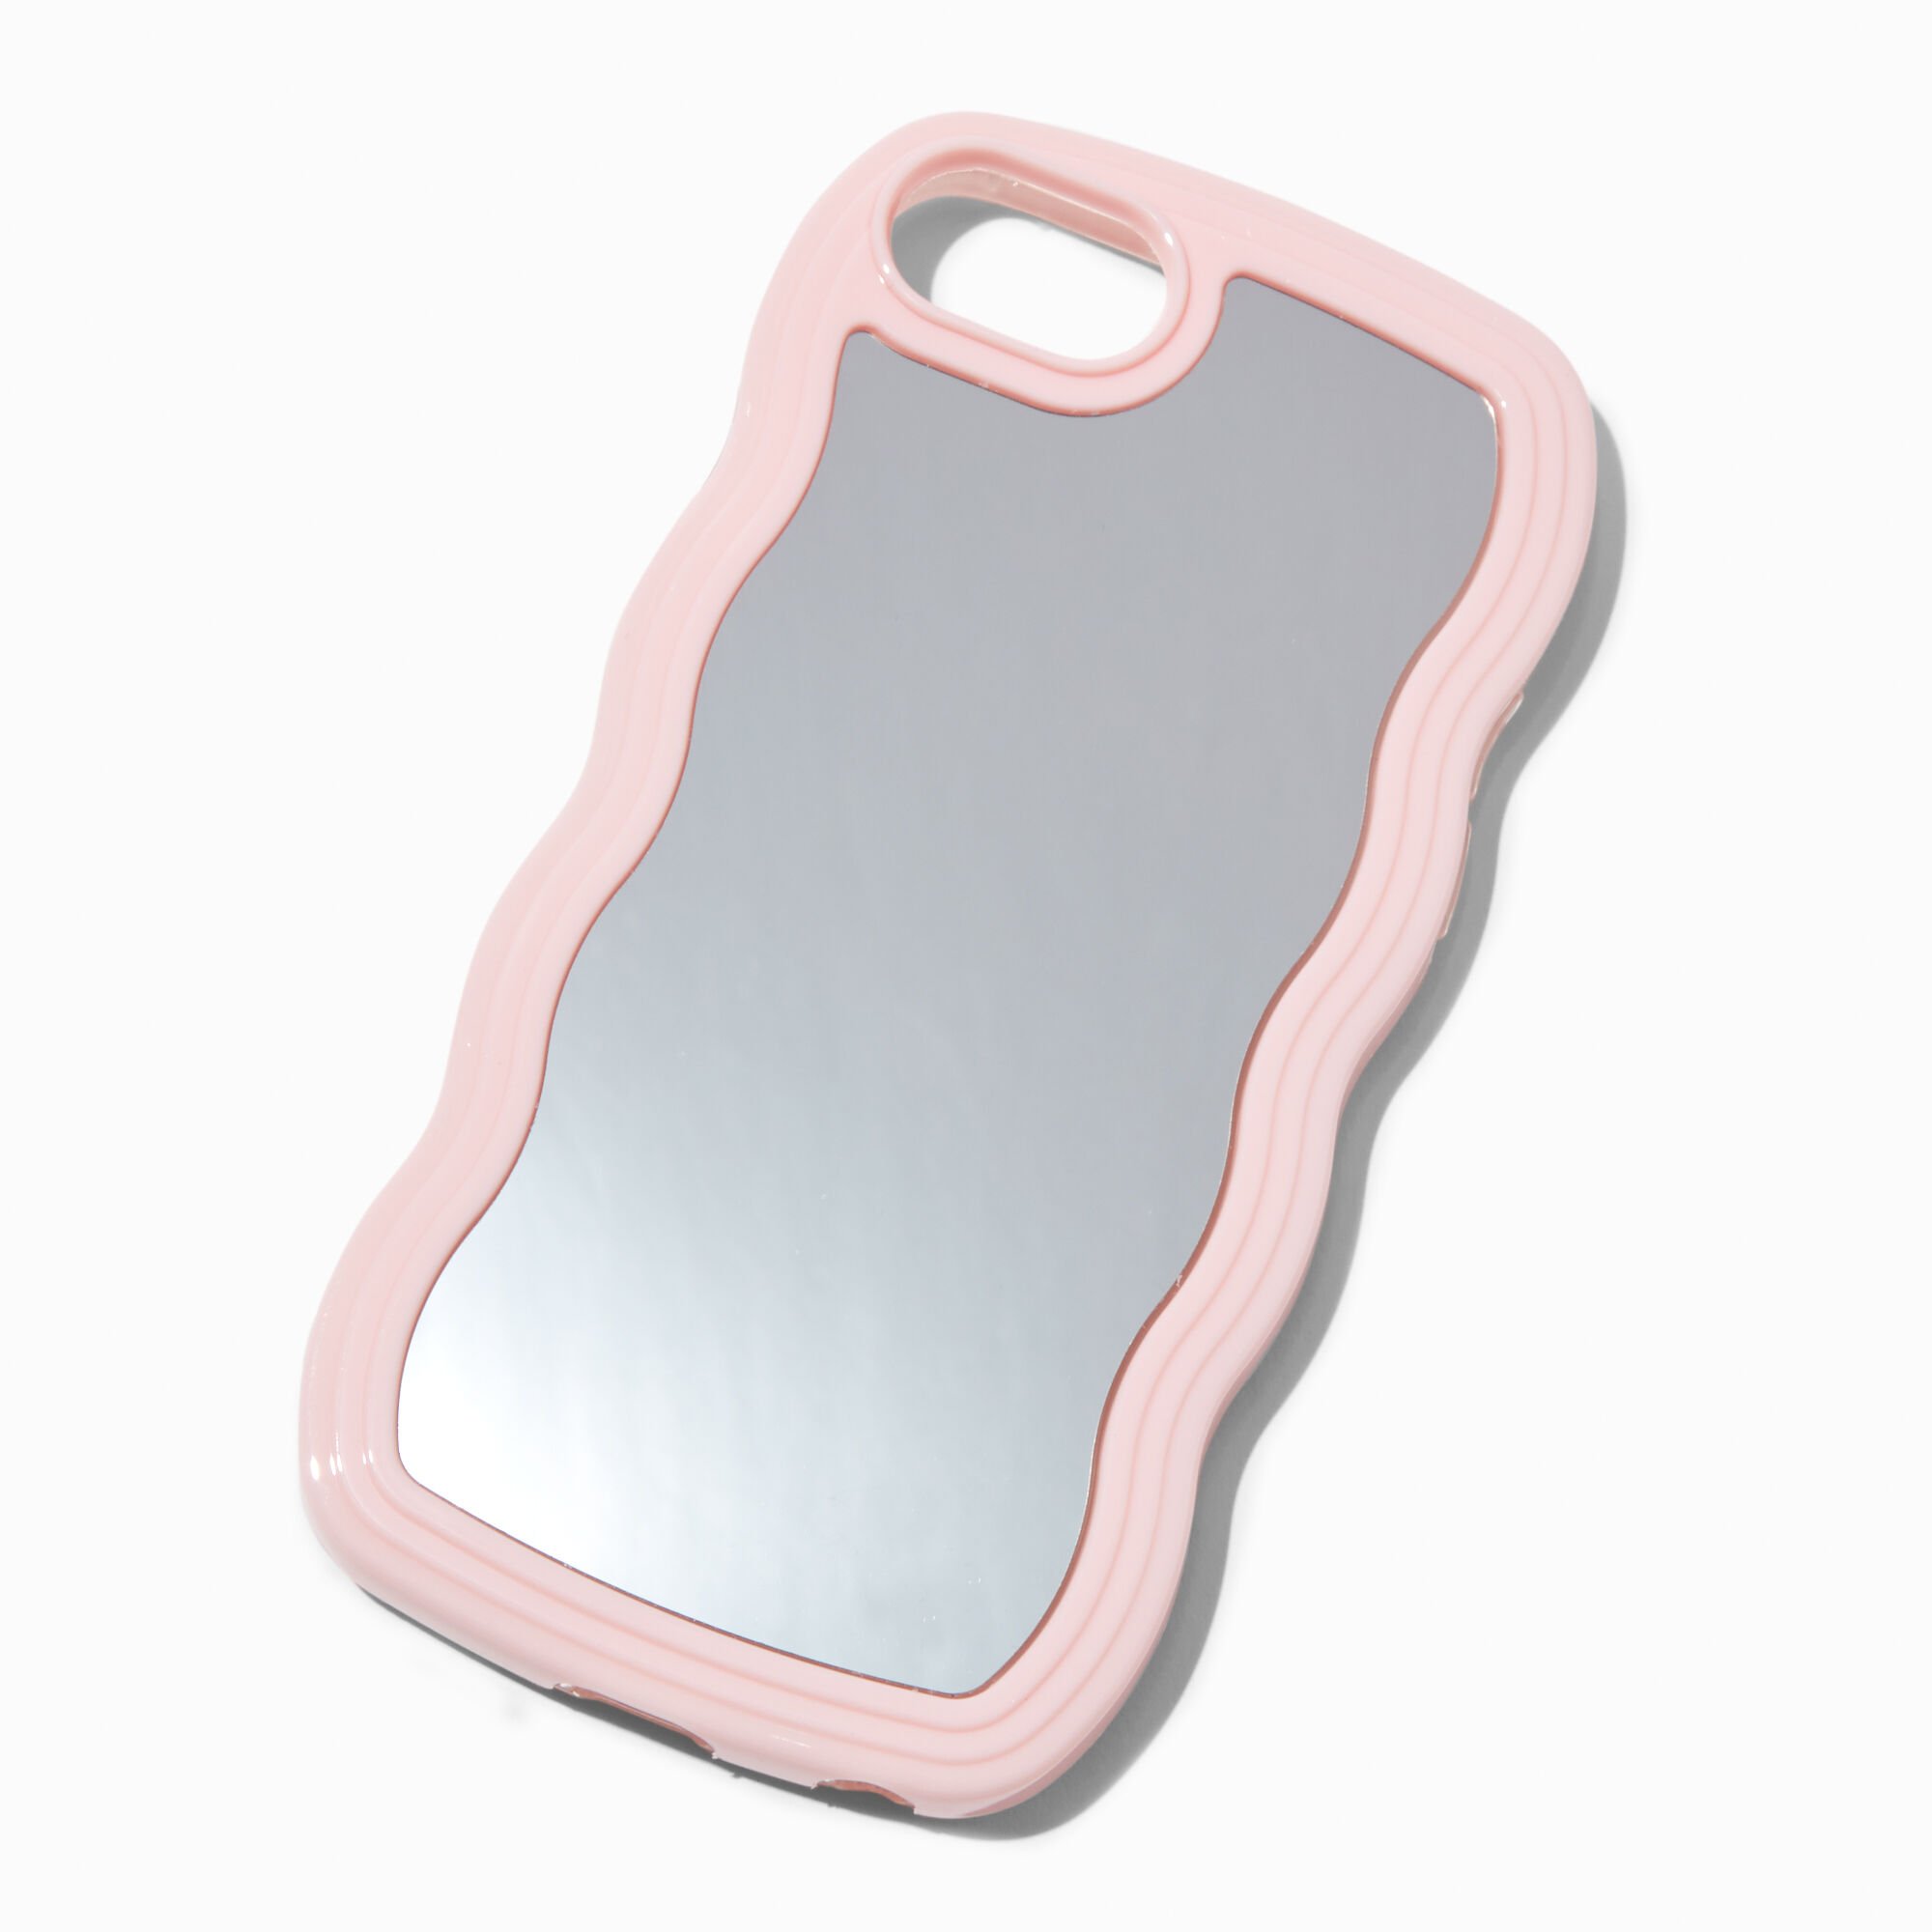 View Claires Trim Wavy Mirror Phone Case Fits Iphone 678se Pink information